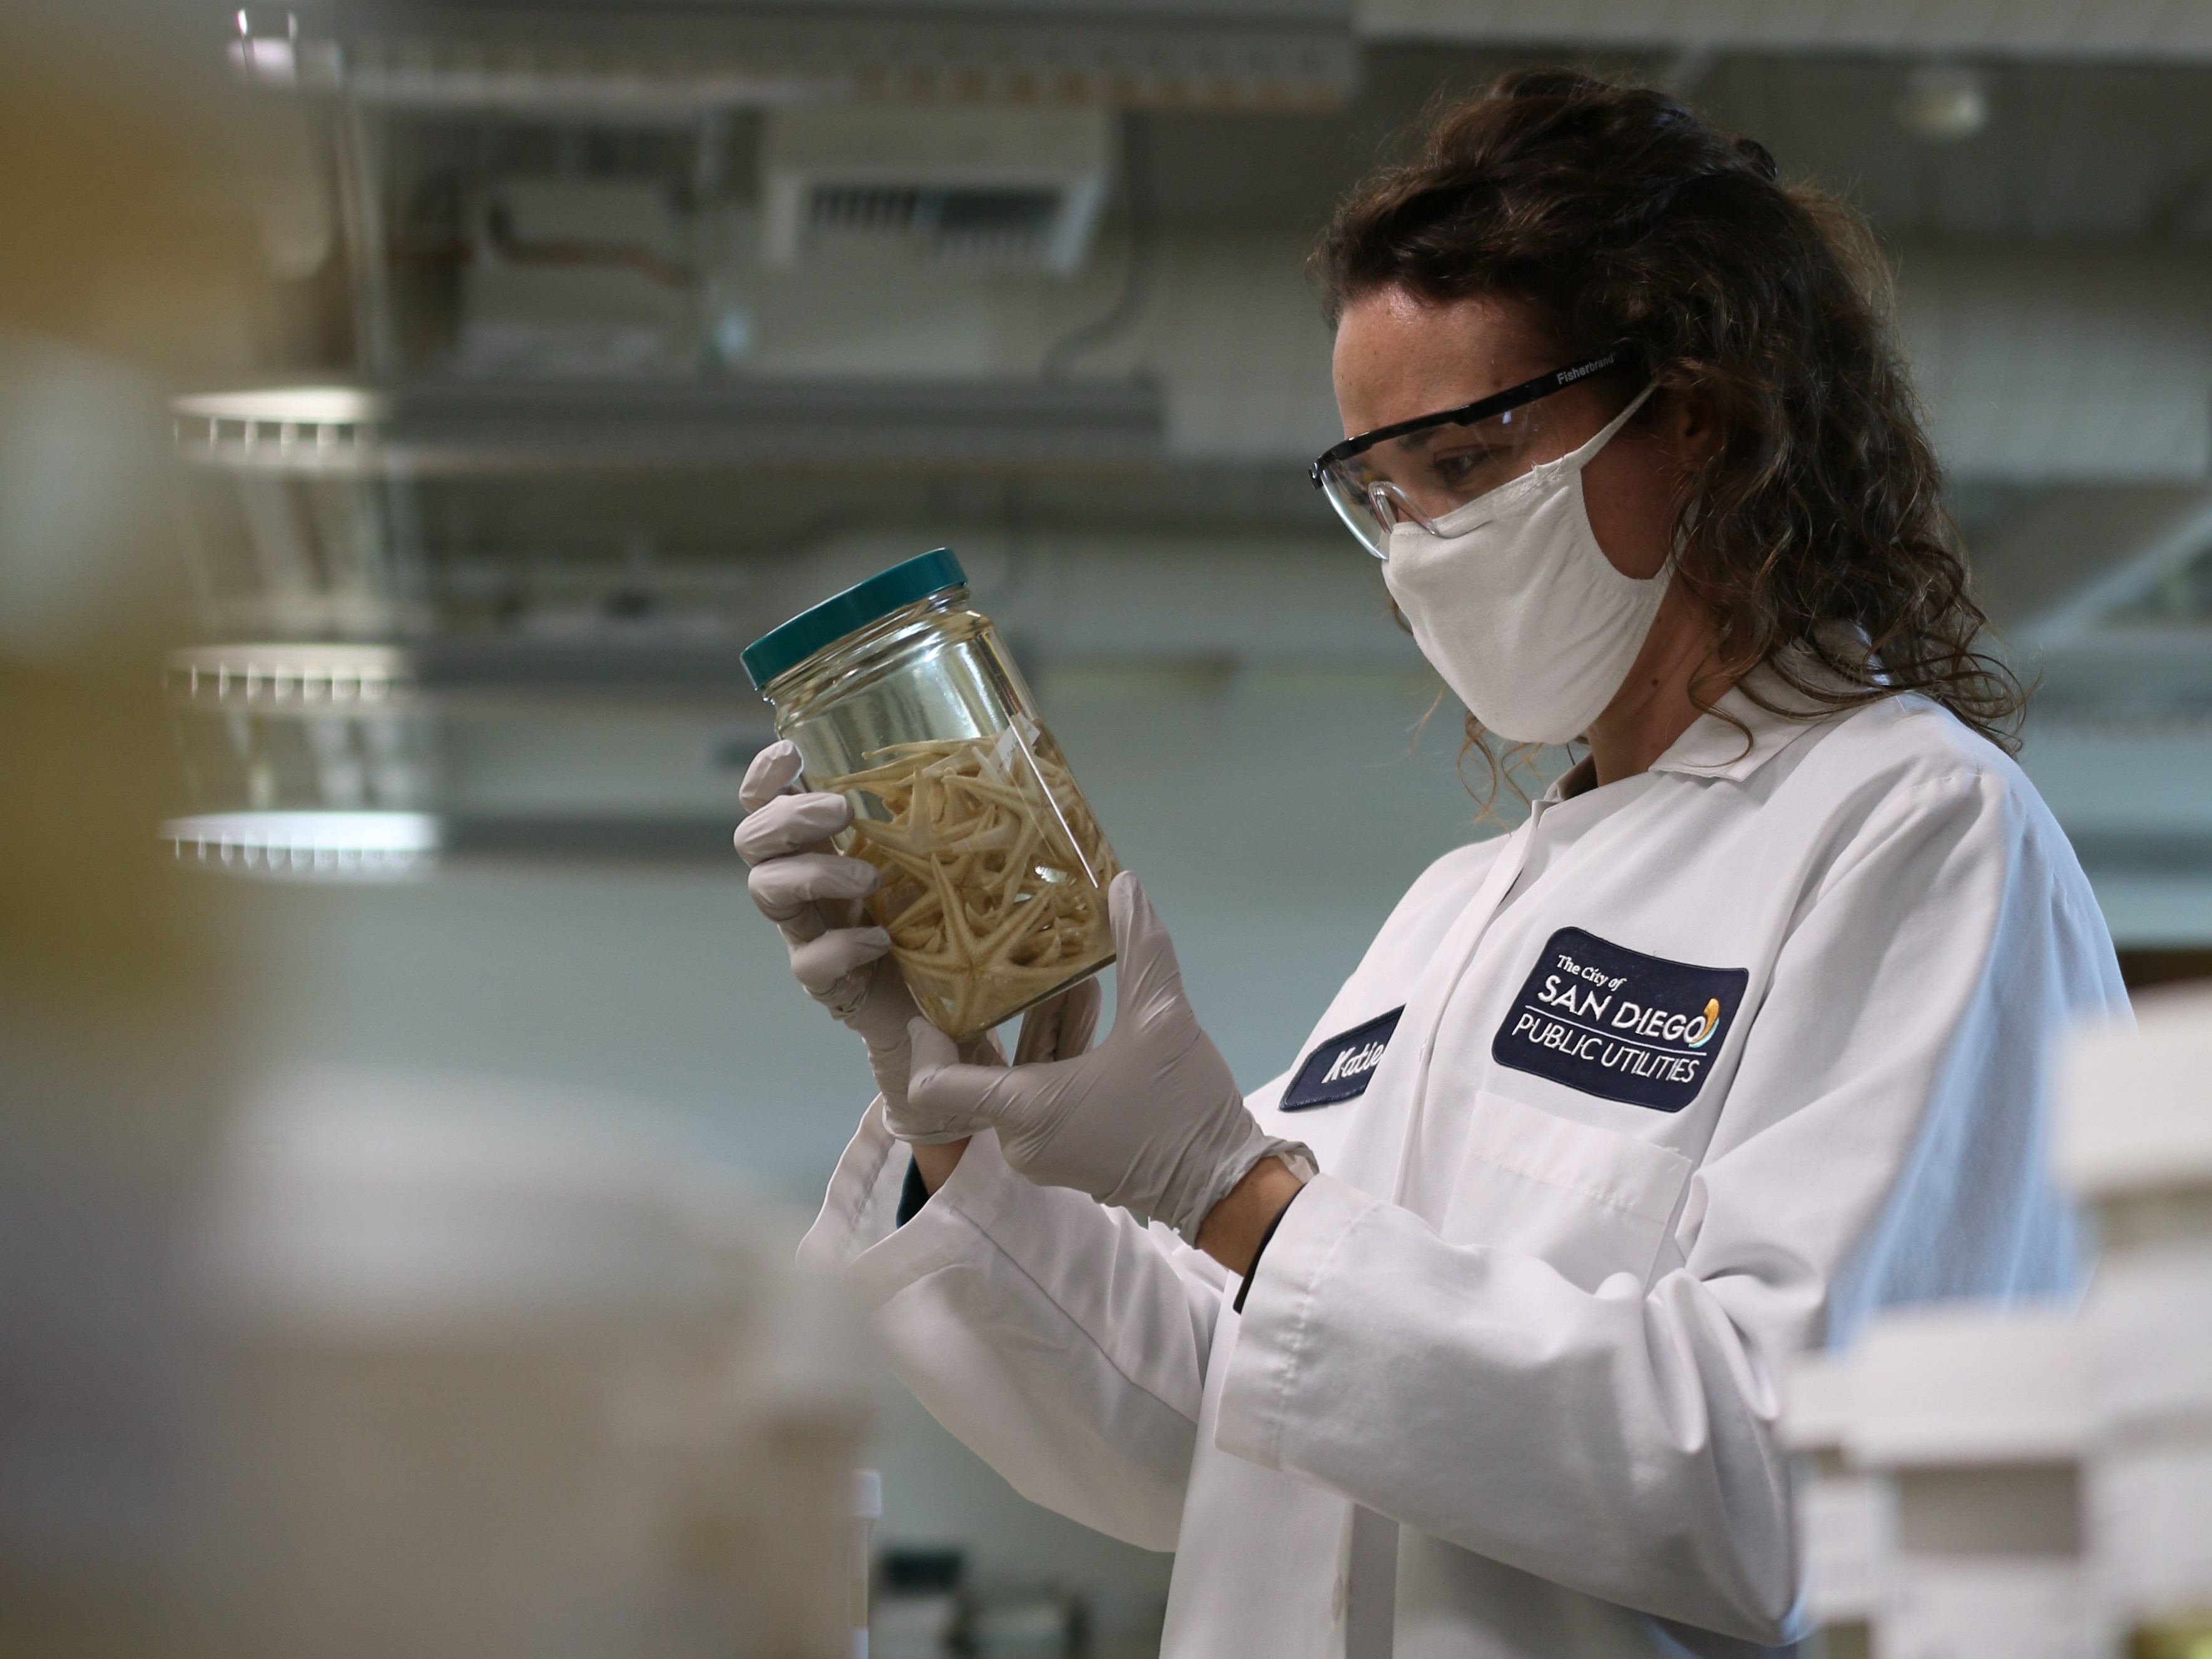 A marine biologist examines a sample for species characteristics and identifying features.